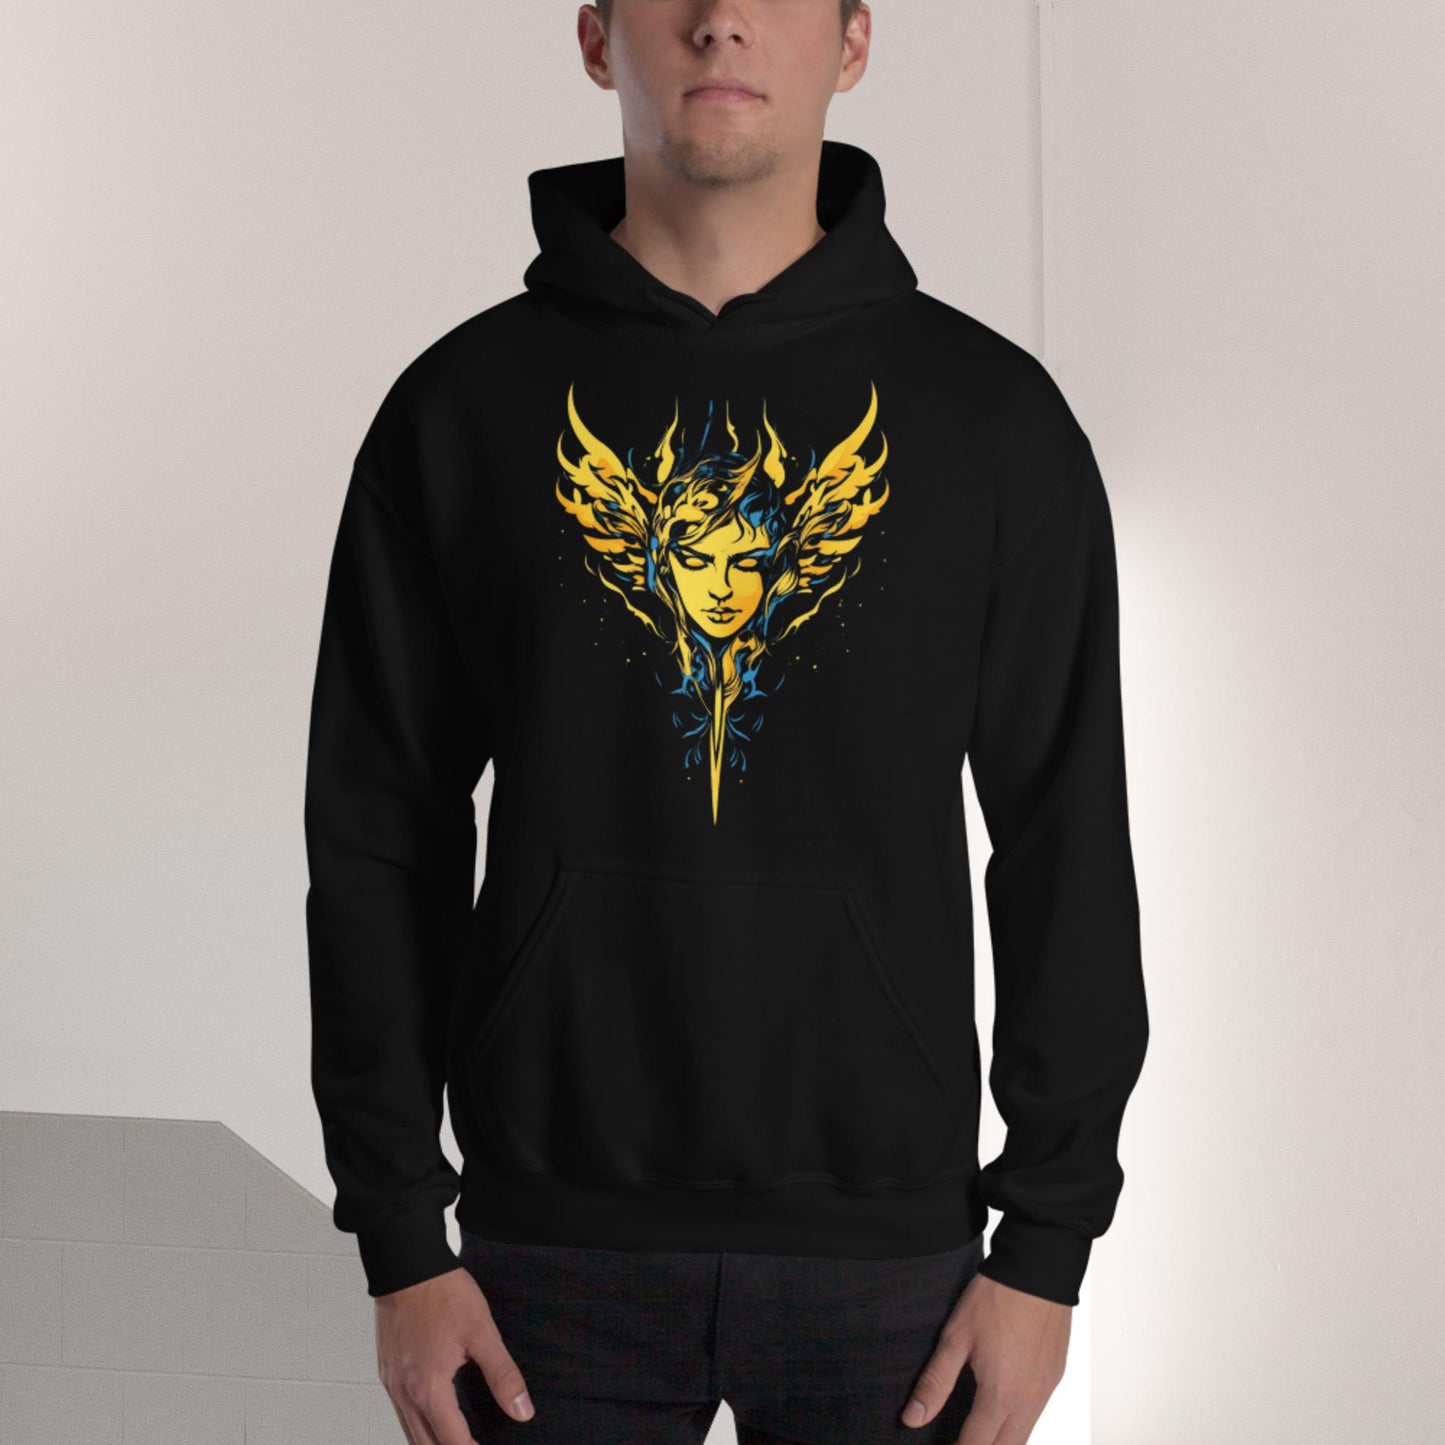 Tranquility 1 Unisex Hoodie